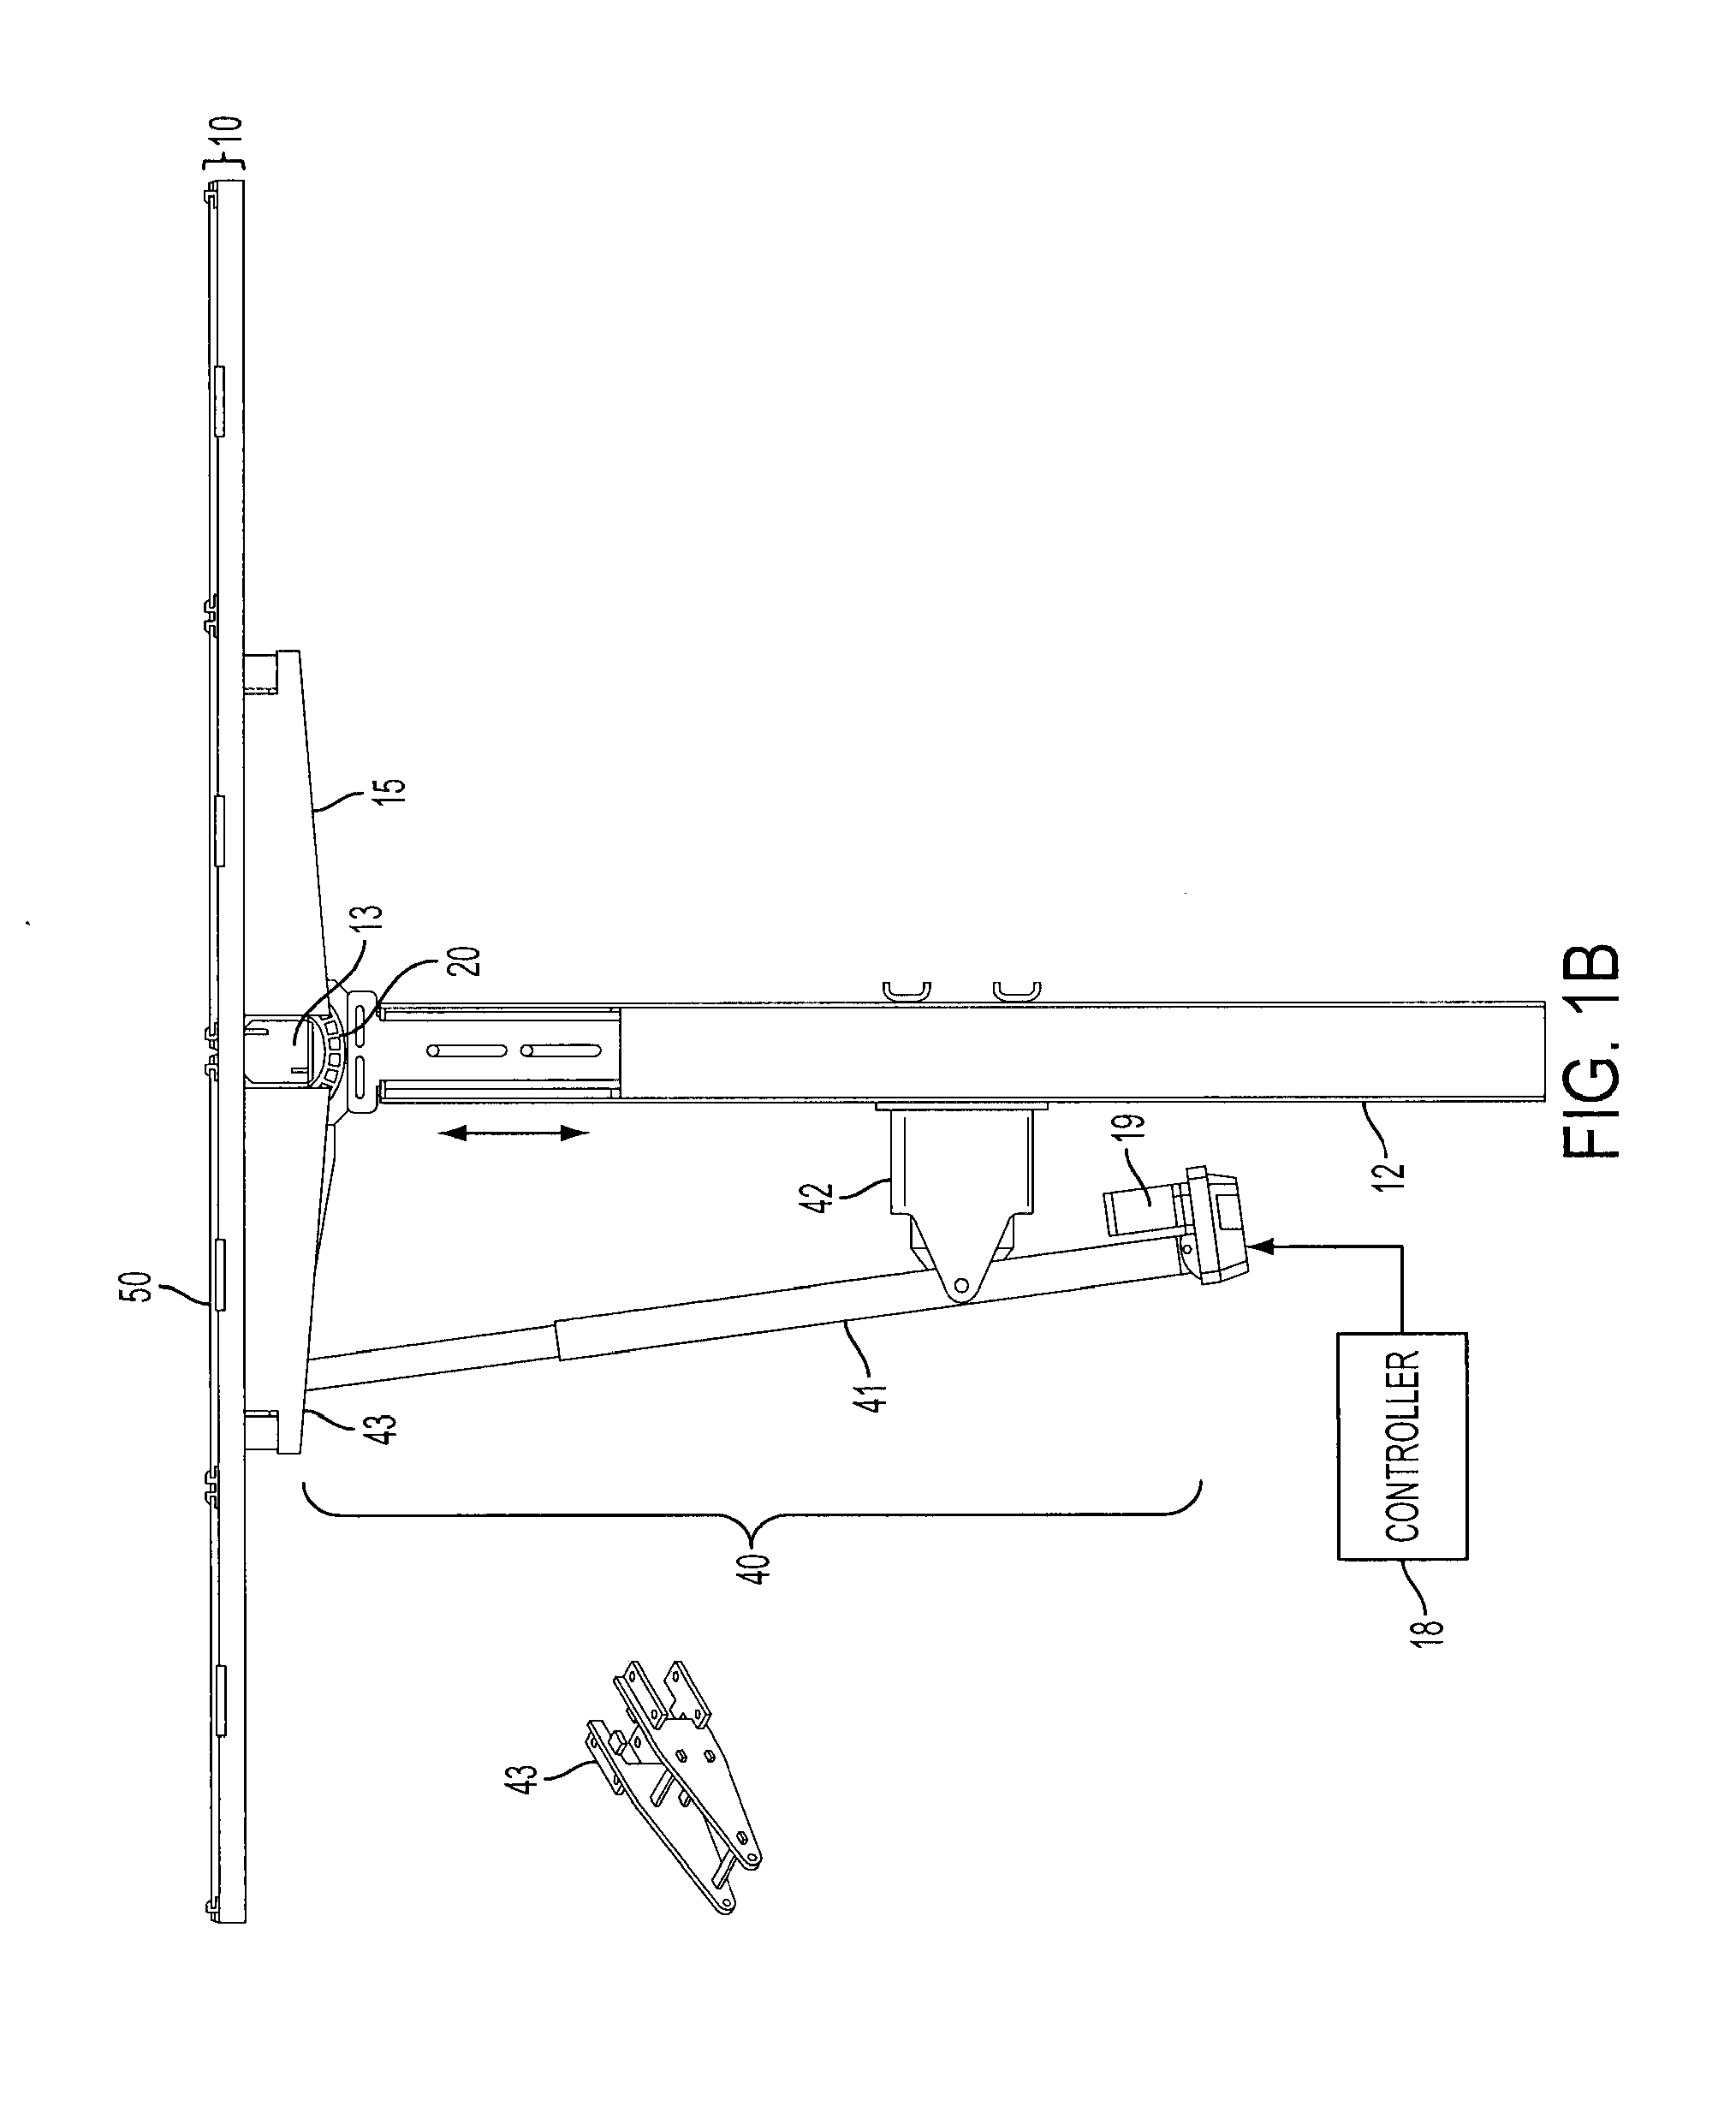 Solar tracking bearing and solar tracking system employing same